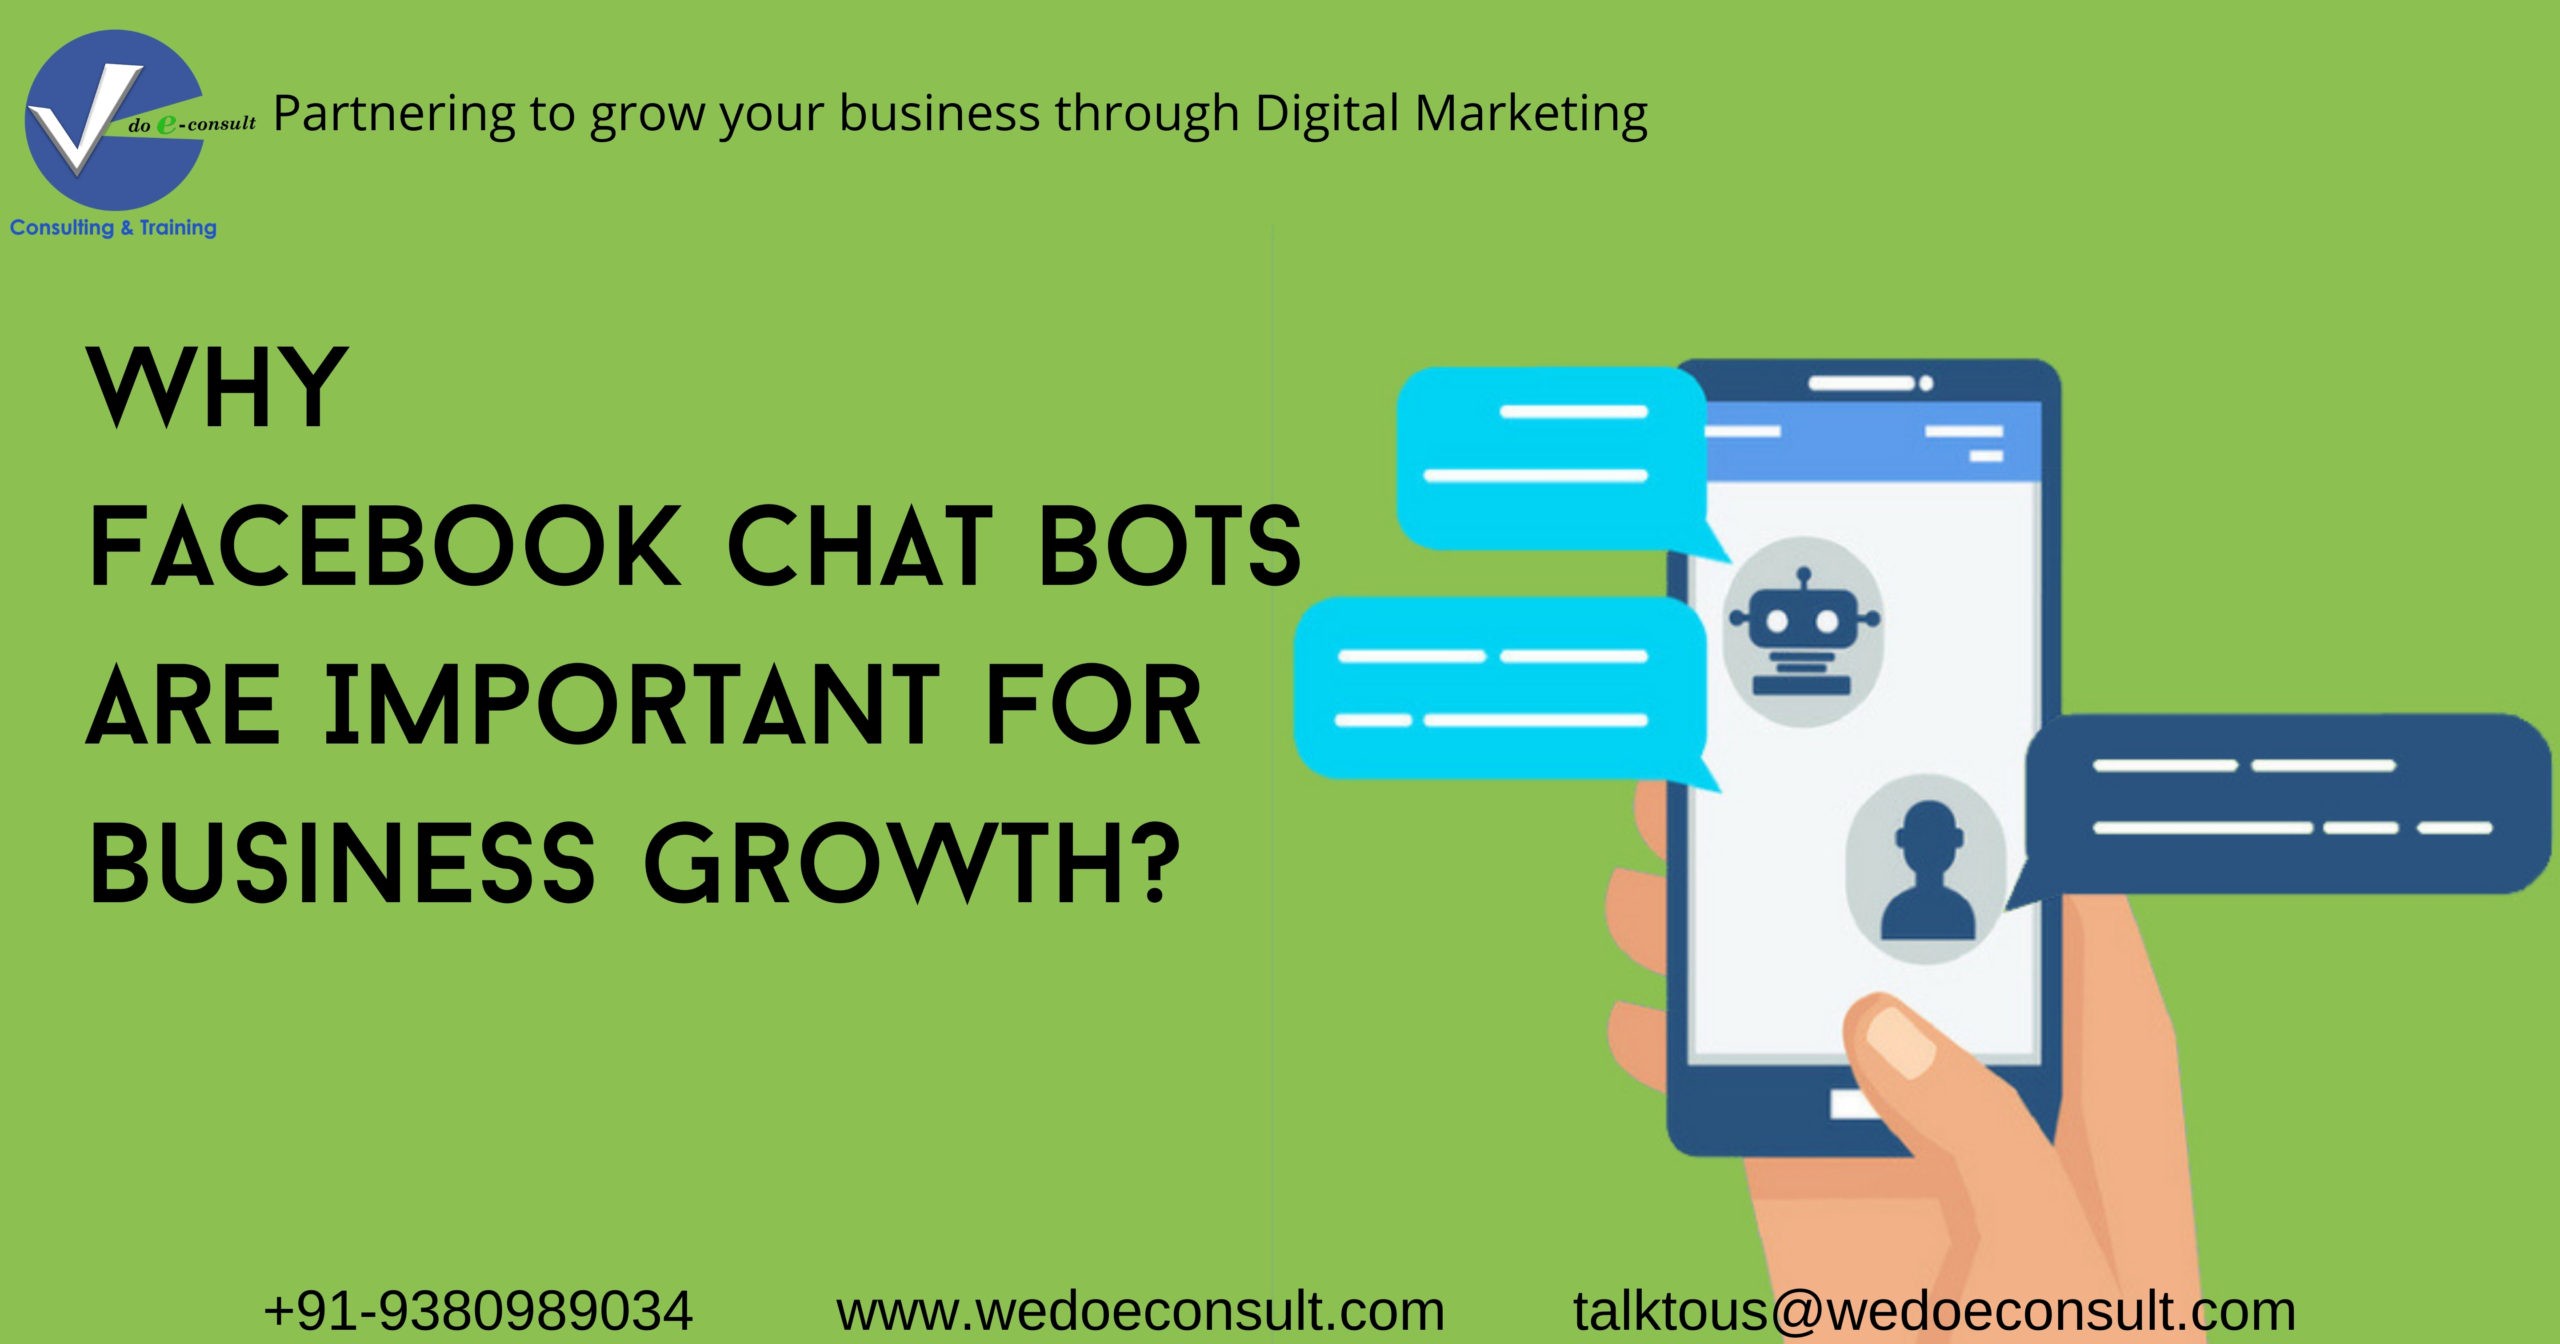 Why Facebook Chat Bots Are Important For Business Growth